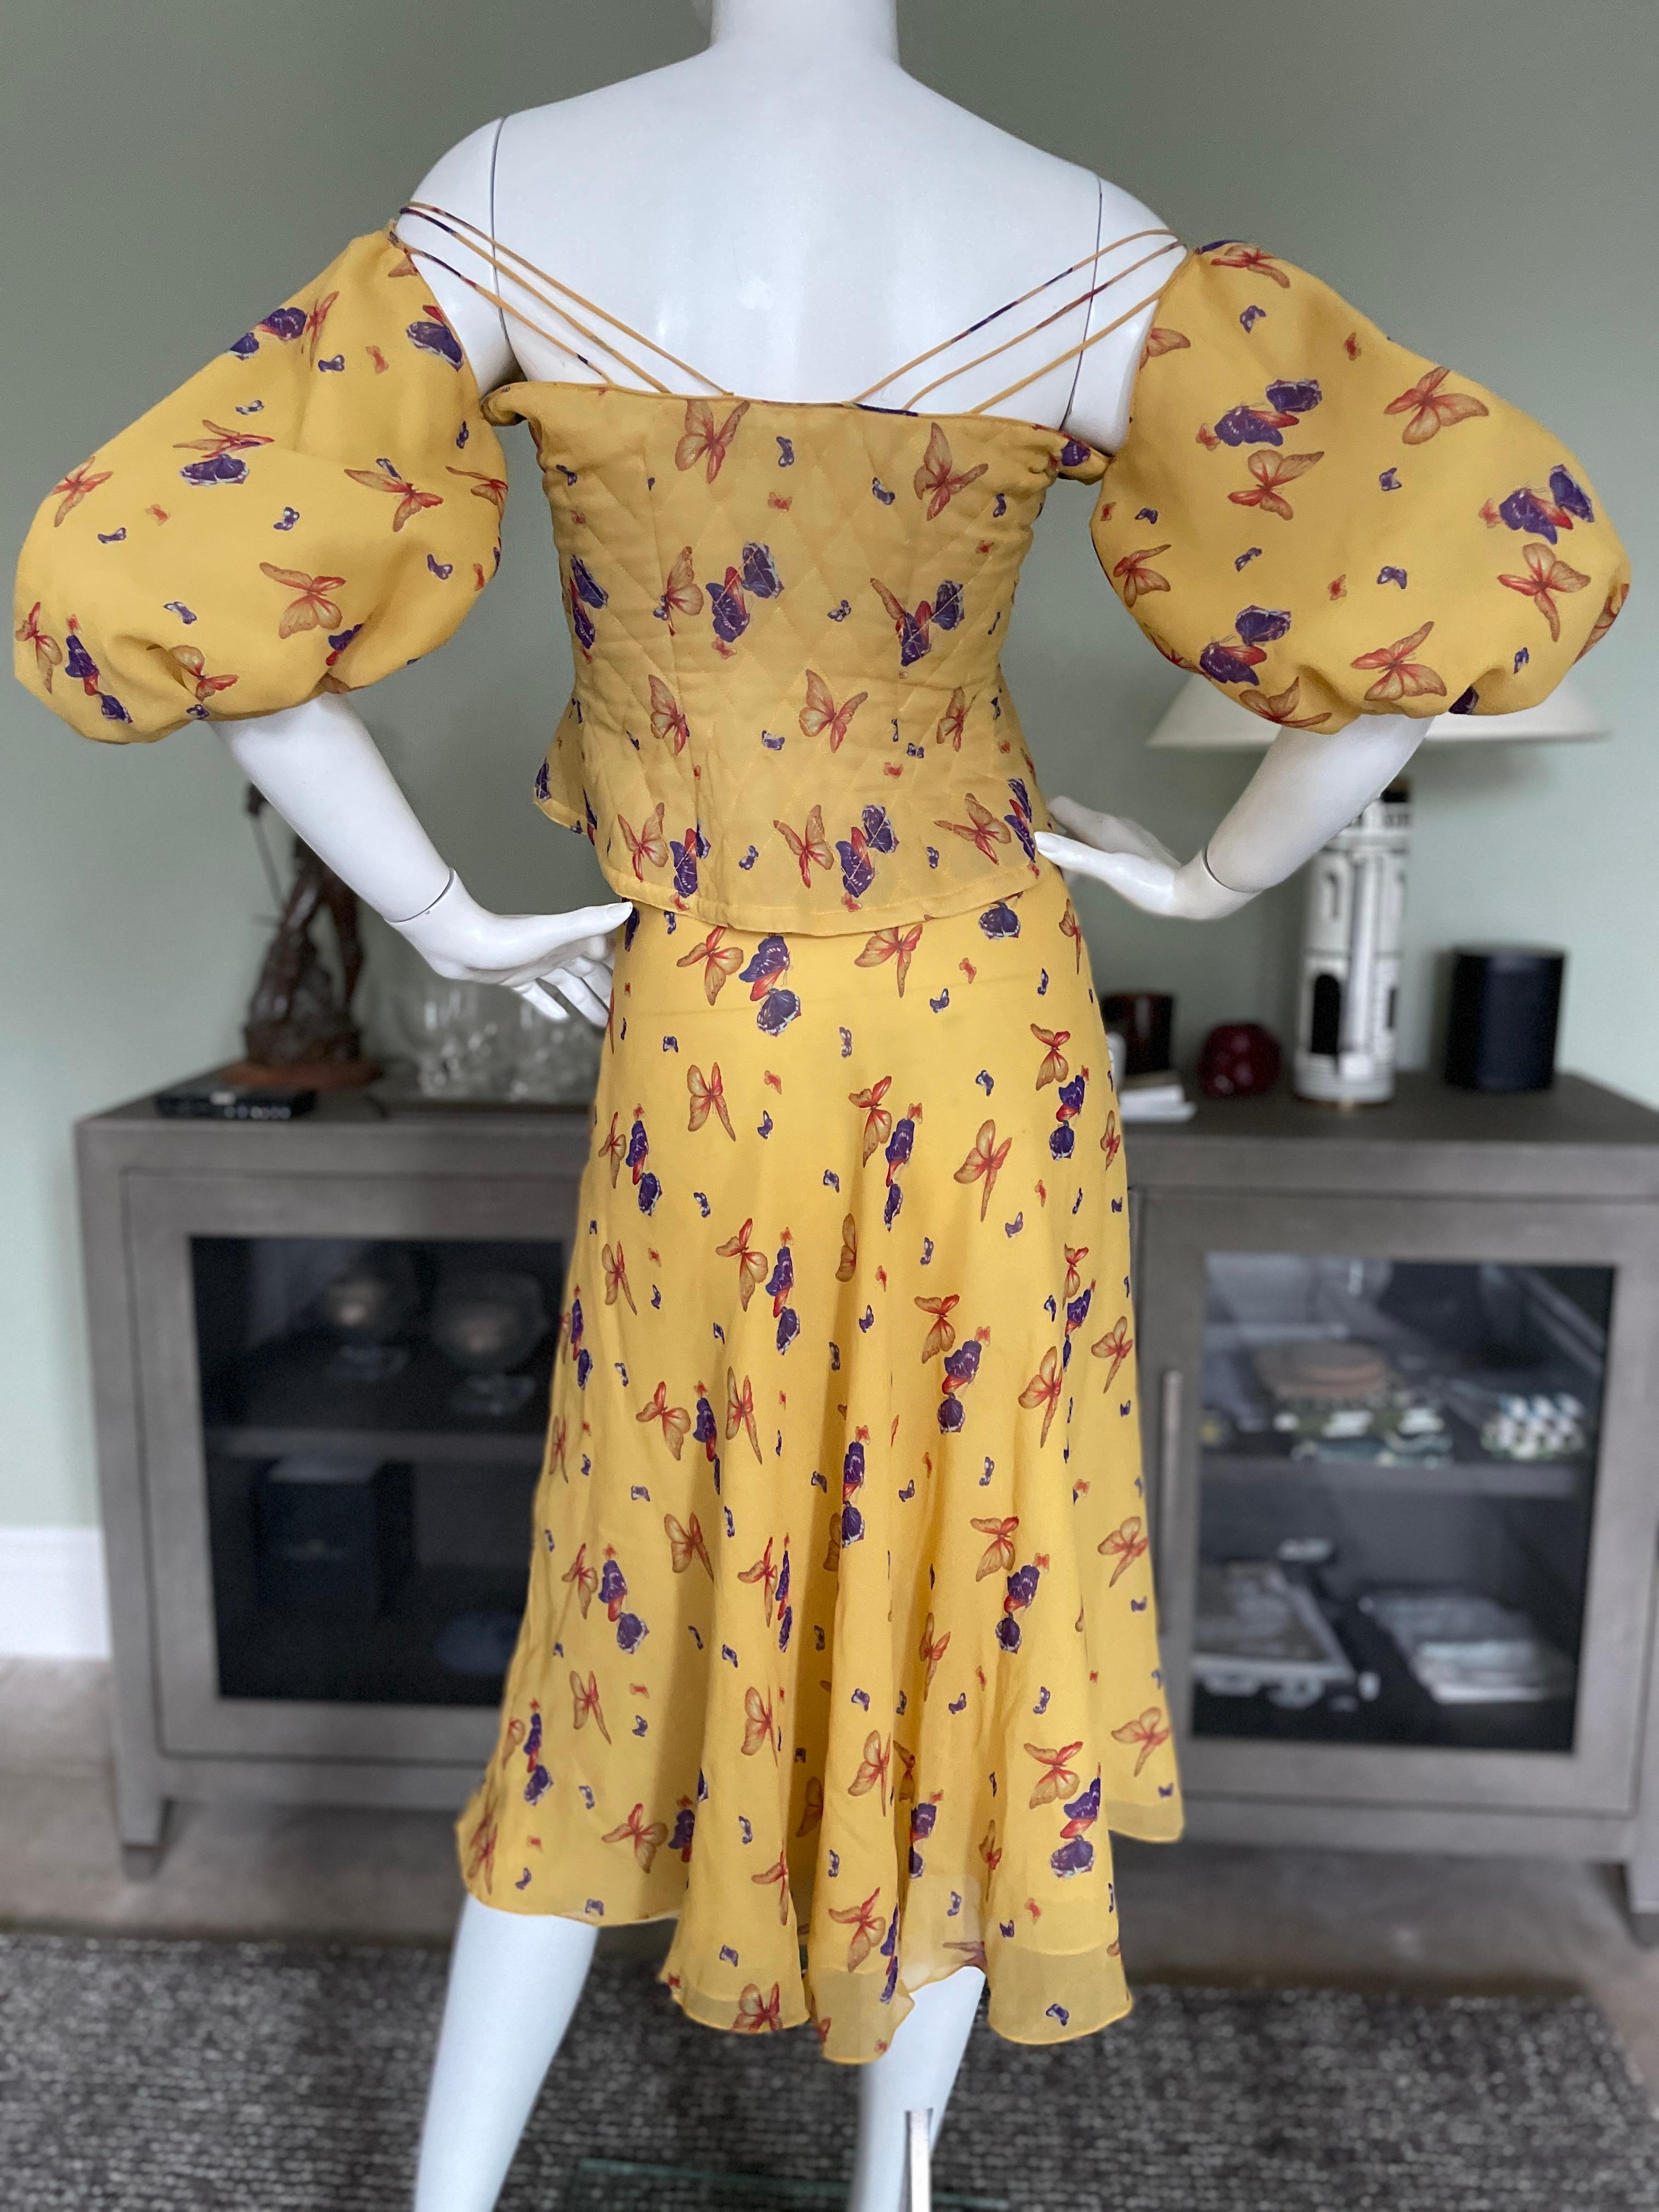 Judy Hornby Couture Vintage 1970's Butterfly Print Two Piece Dress Set
This is so pretty, with semi detached balloon sleeves.
Size 6
Bust 36